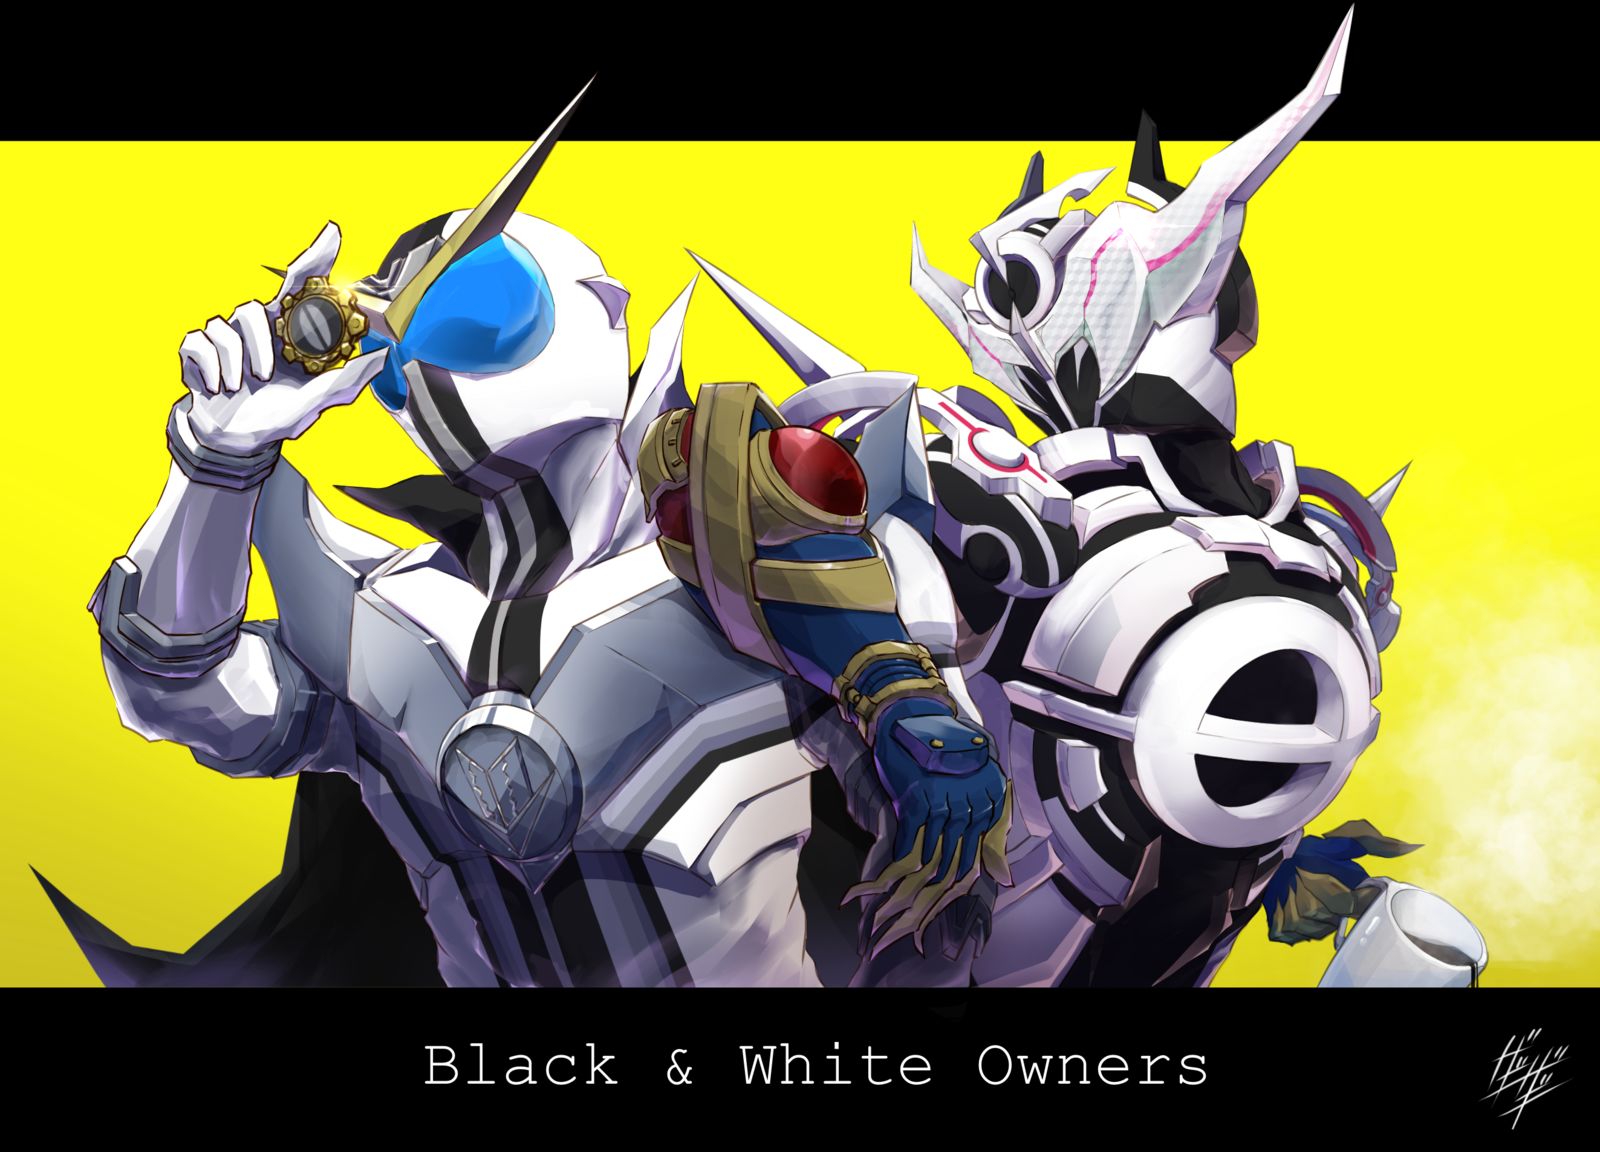 Black & White Owners